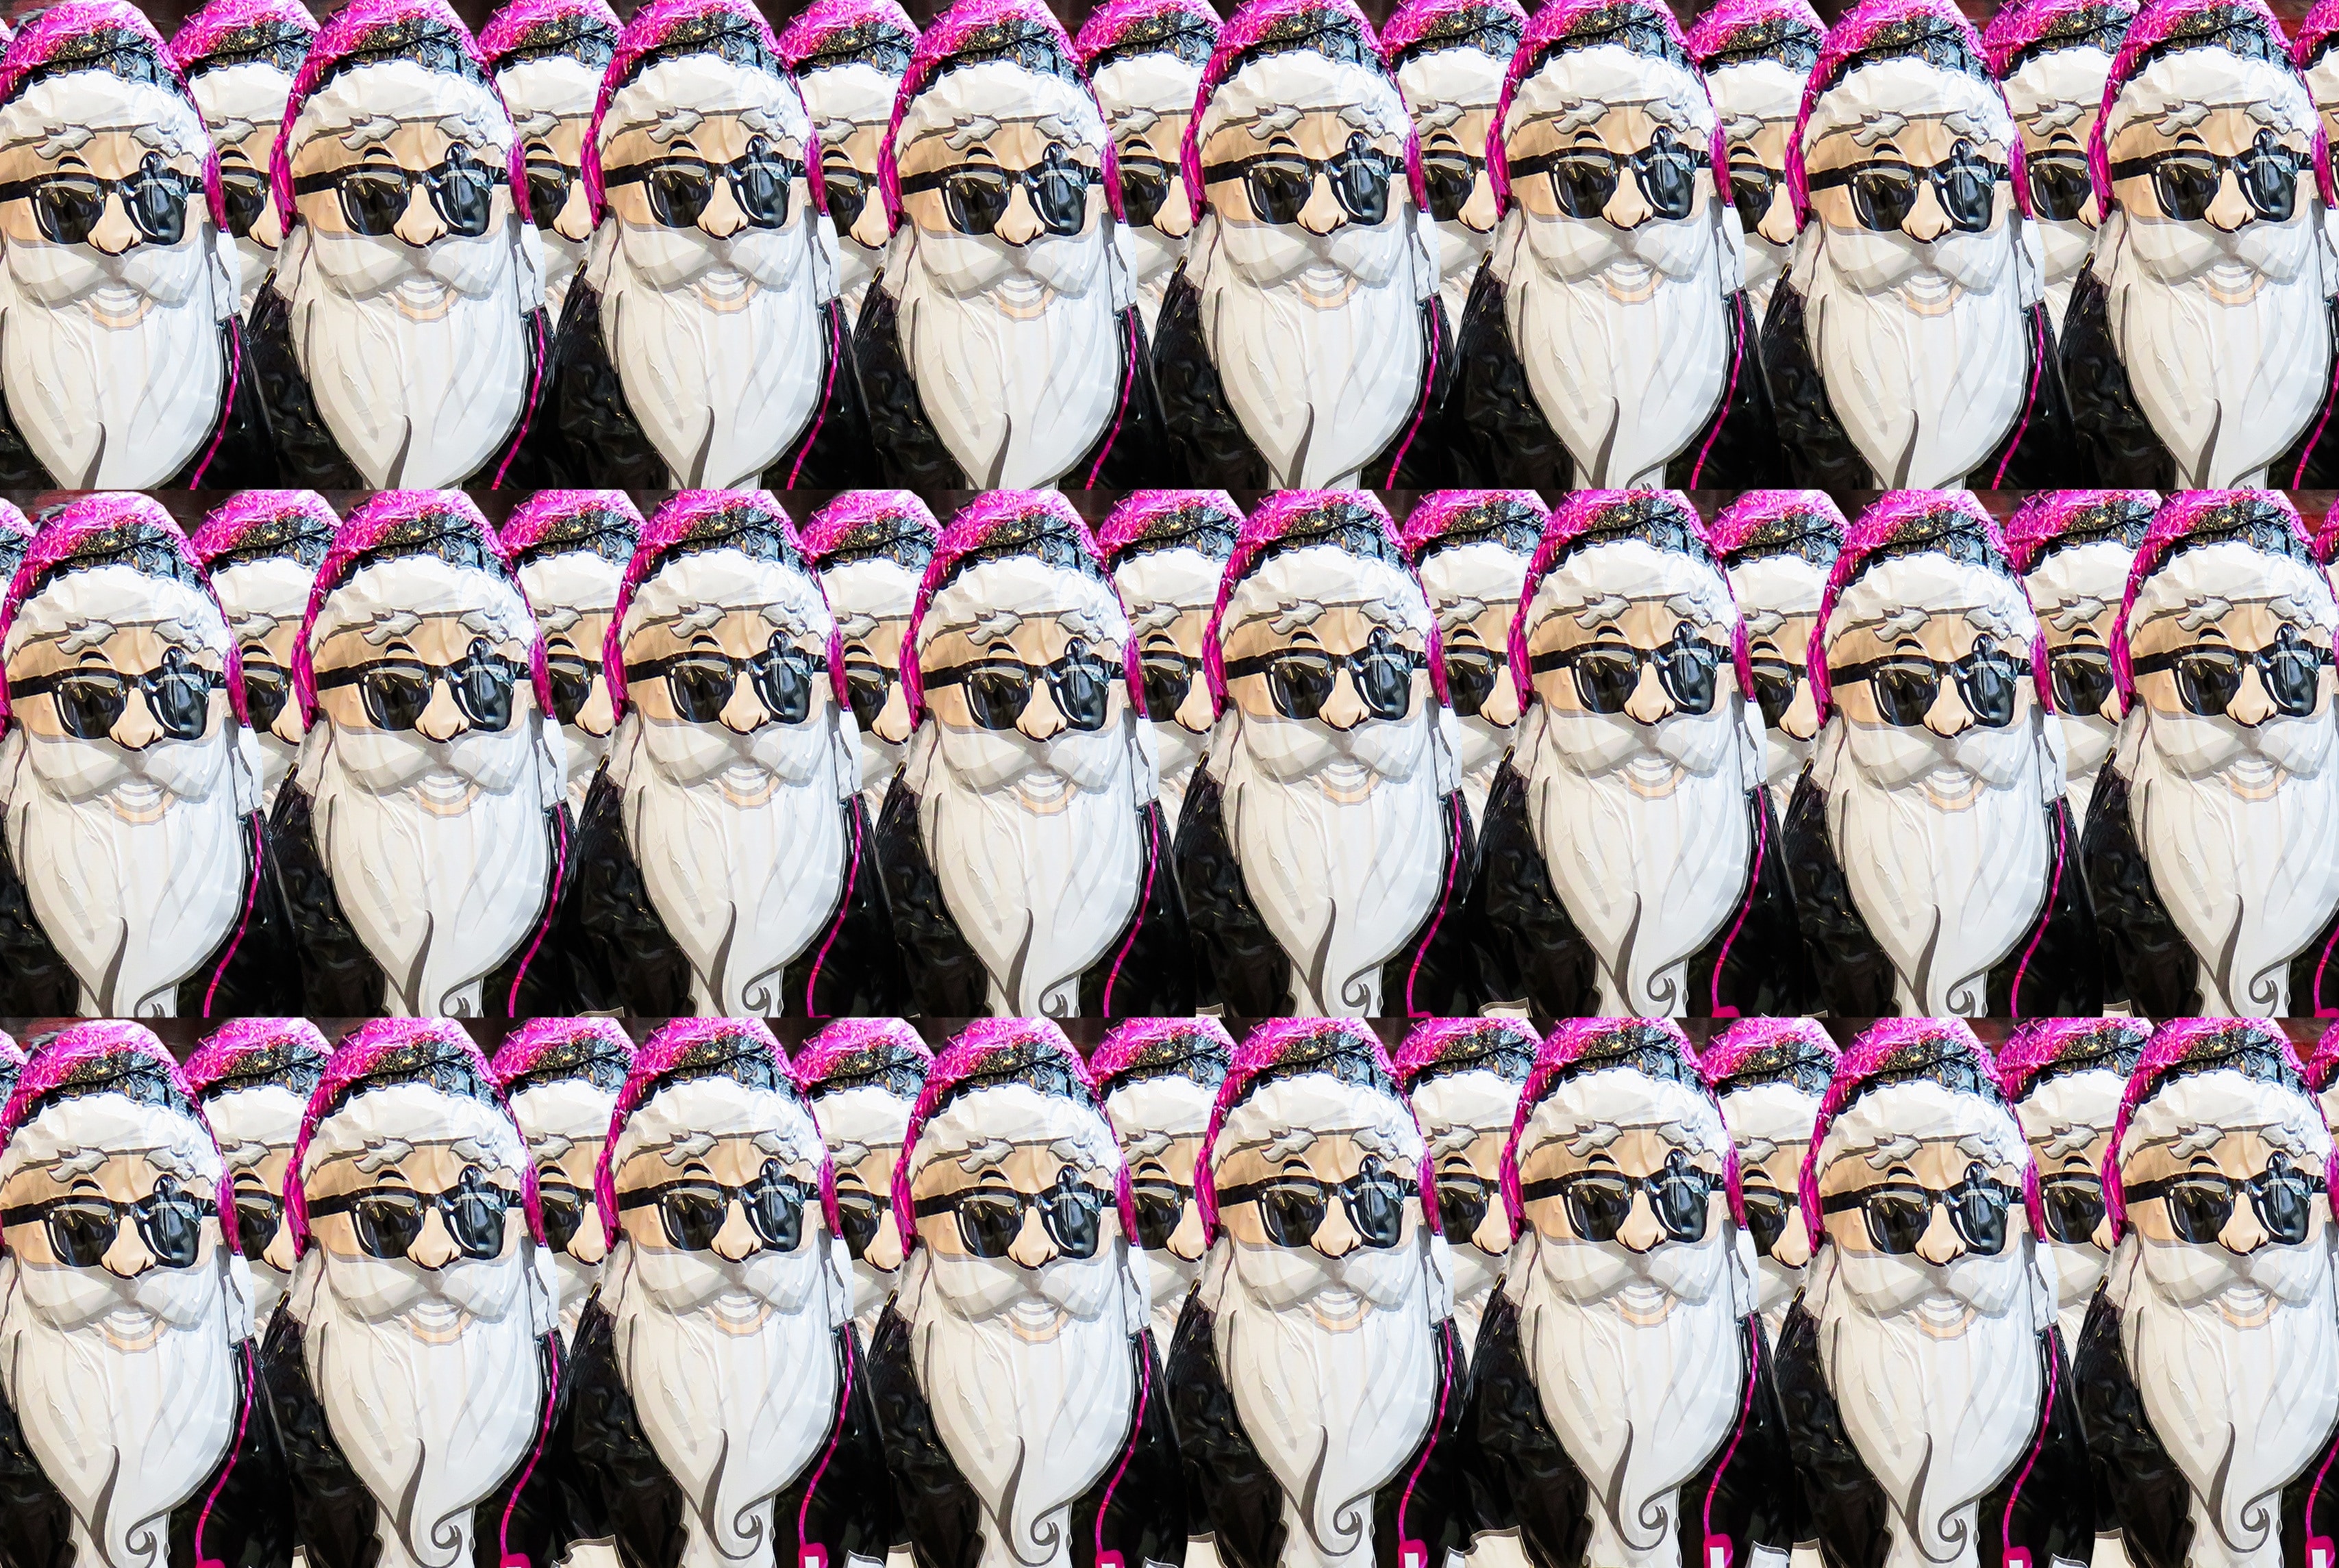 Nicholas, Christmas, Santa Claus, in a row, large group of objects